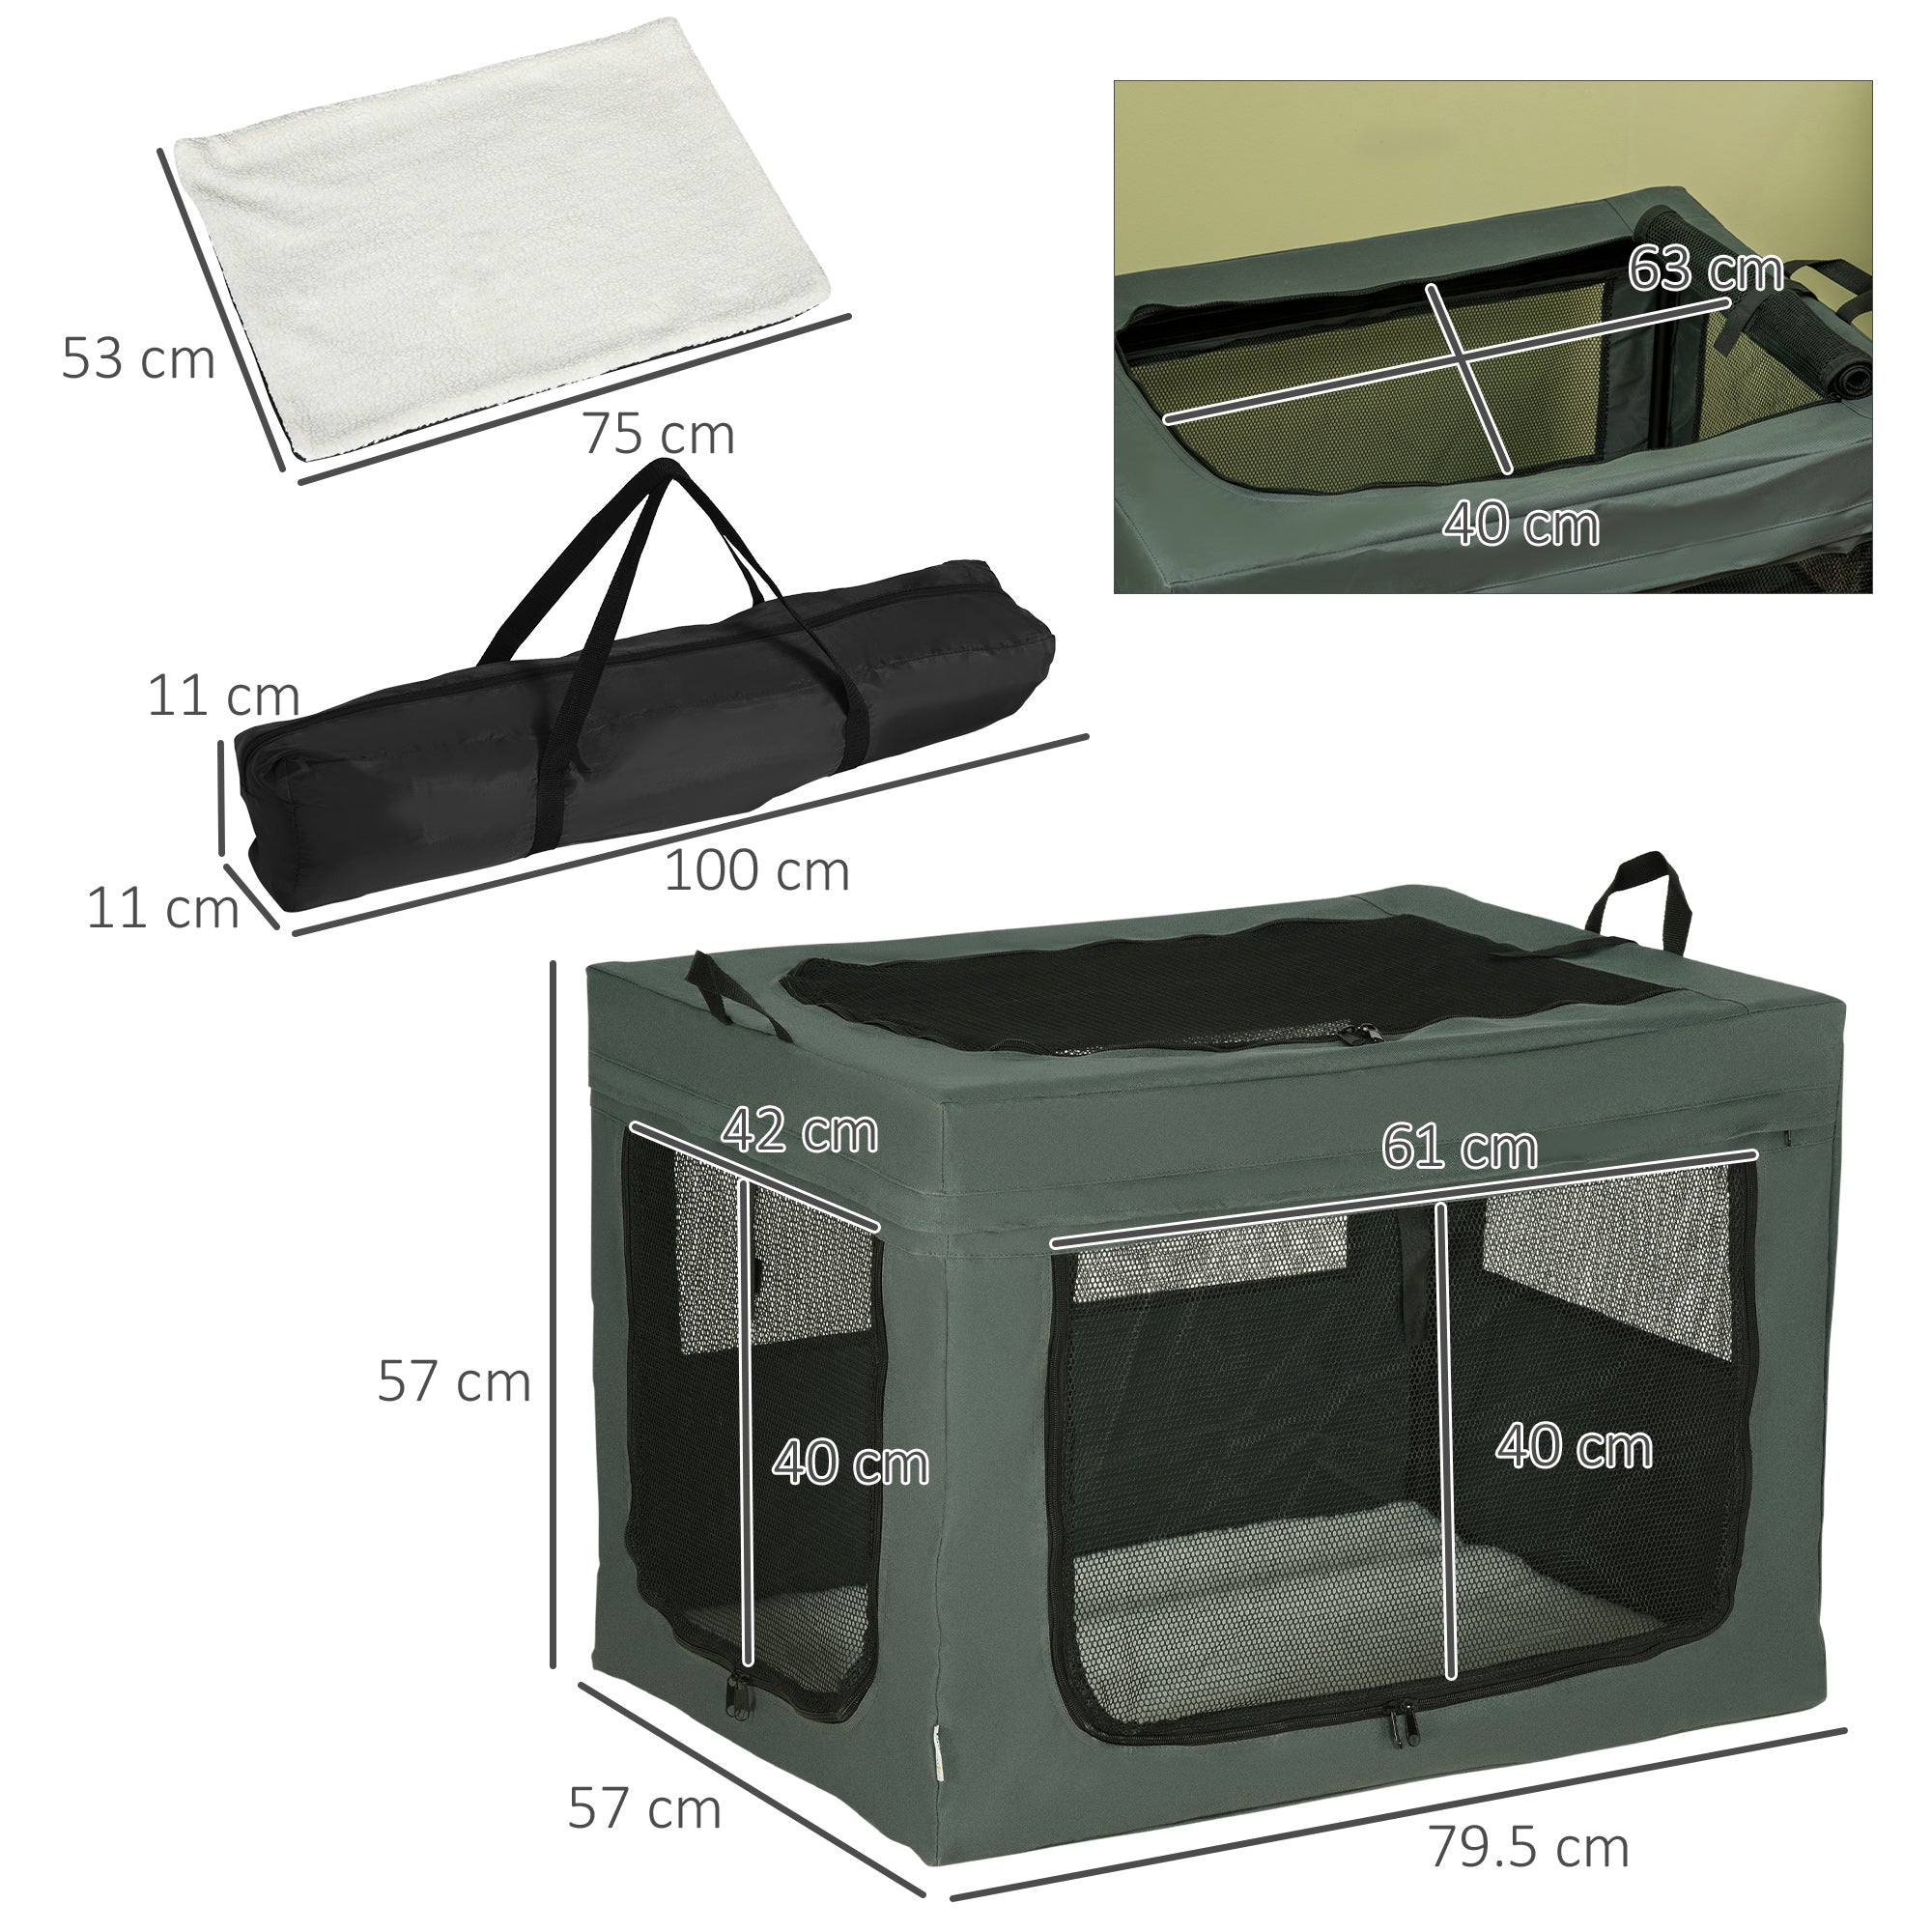 Pet Carrier, Portable Cat Carrier, Foldable Dog Bag for Small and Medium Dogs, 79.5 x 57 x 57 cm, Grey-2